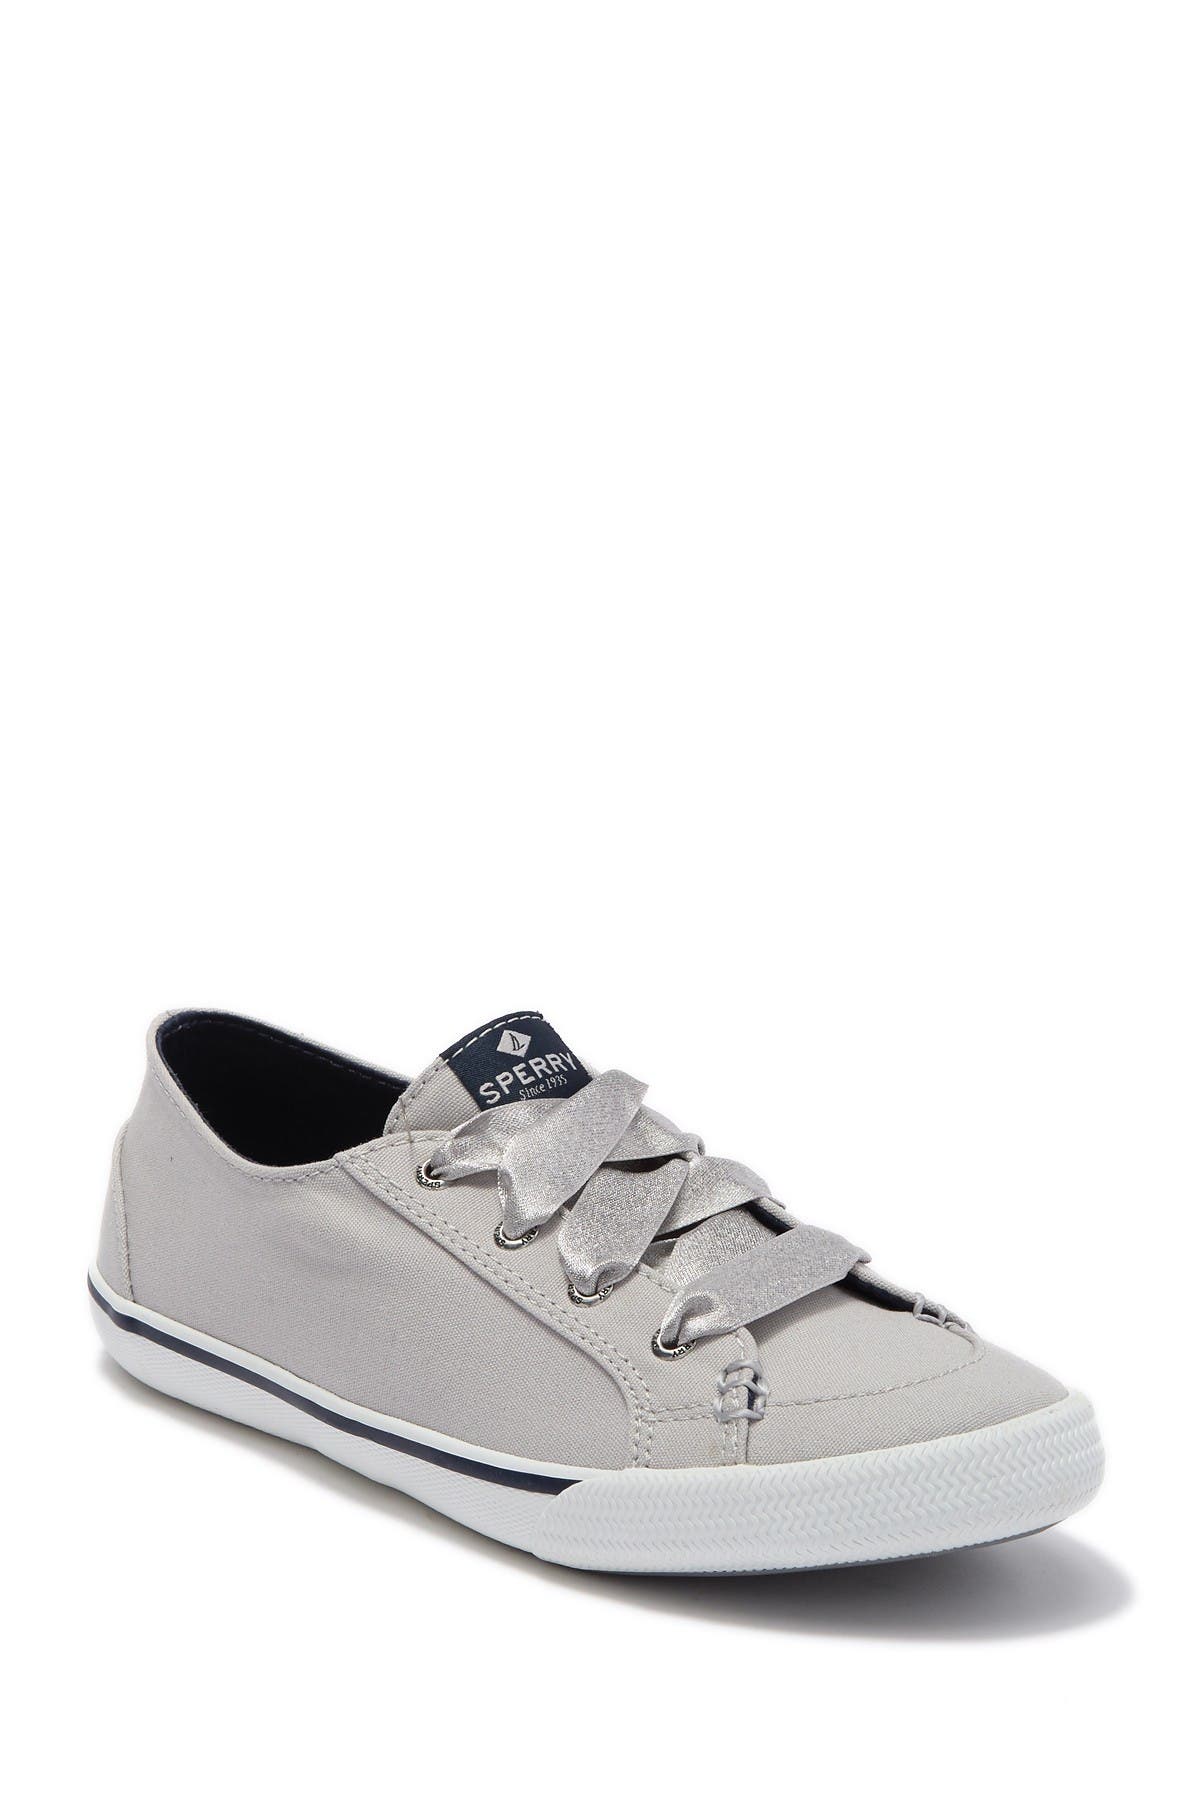 sperry satin lace sneaker